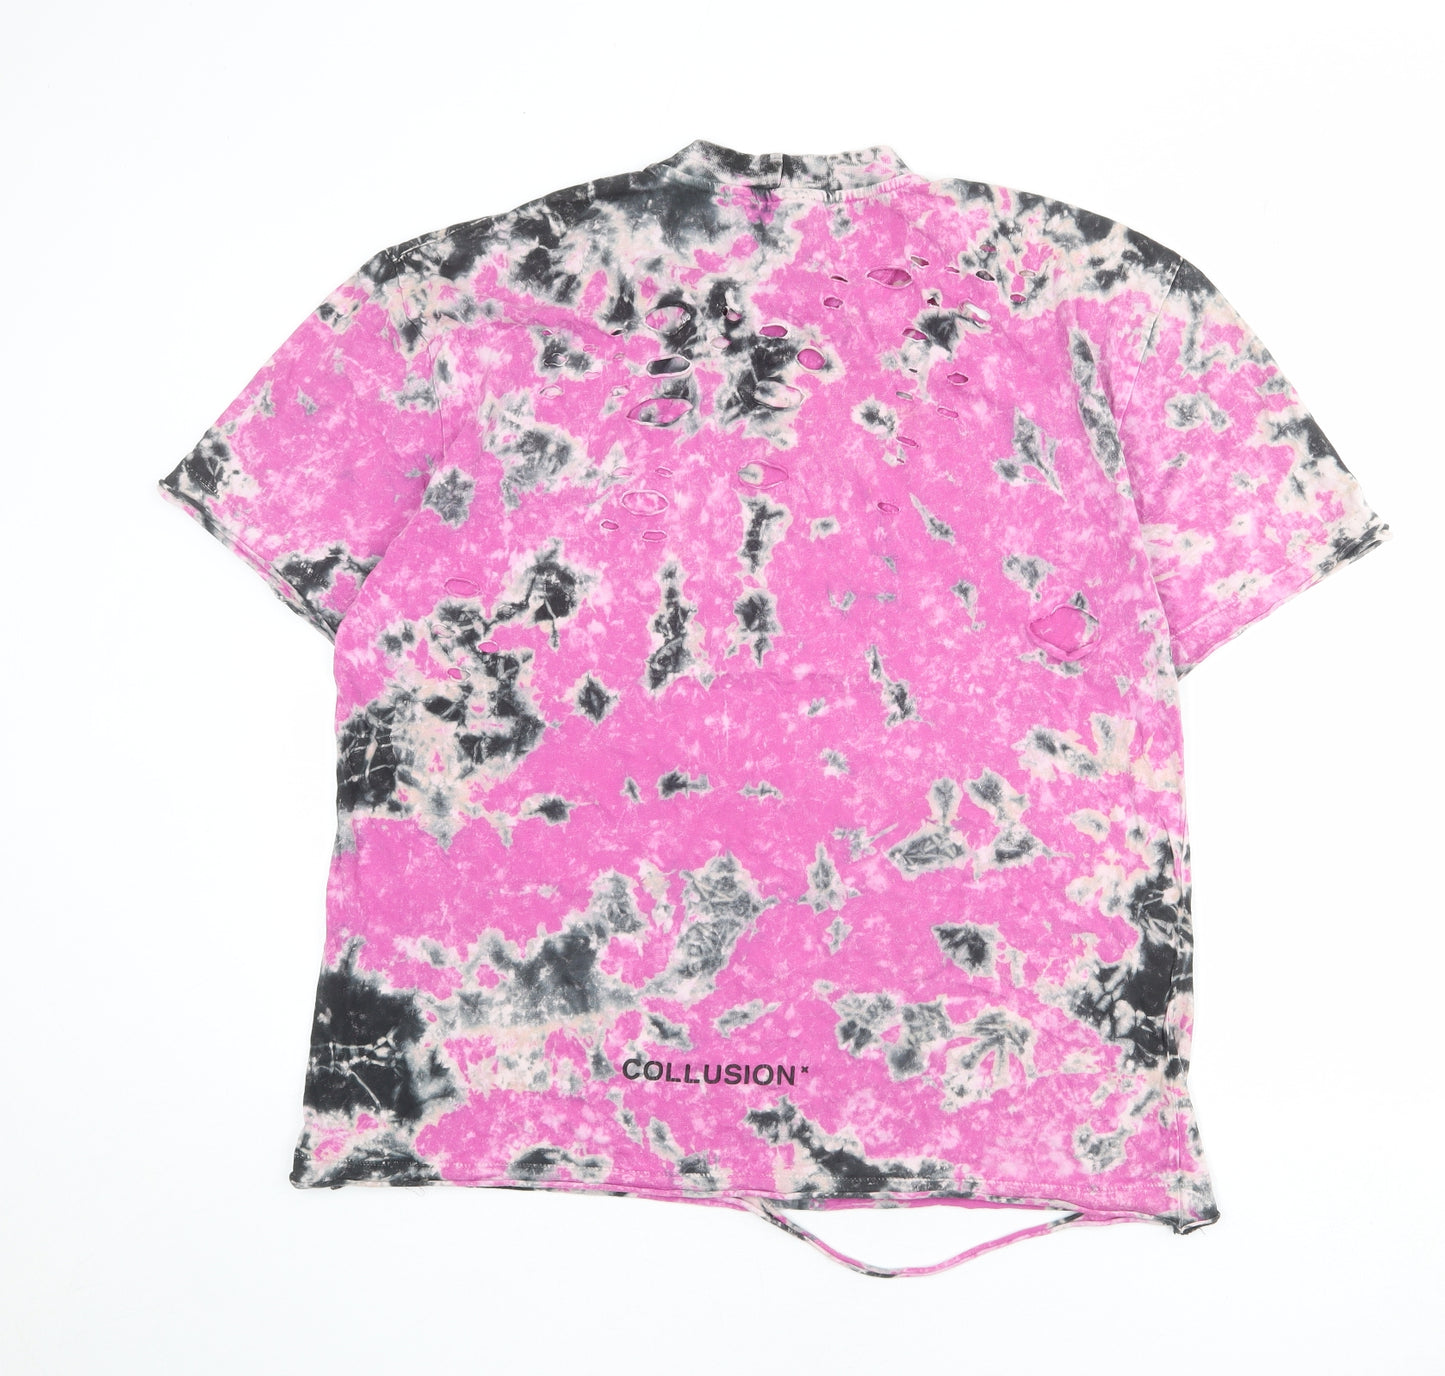 COLLUSION Mens Pink Geometric Cotton T-Shirt Size M Crew Neck - Distressed look, tie dye effect